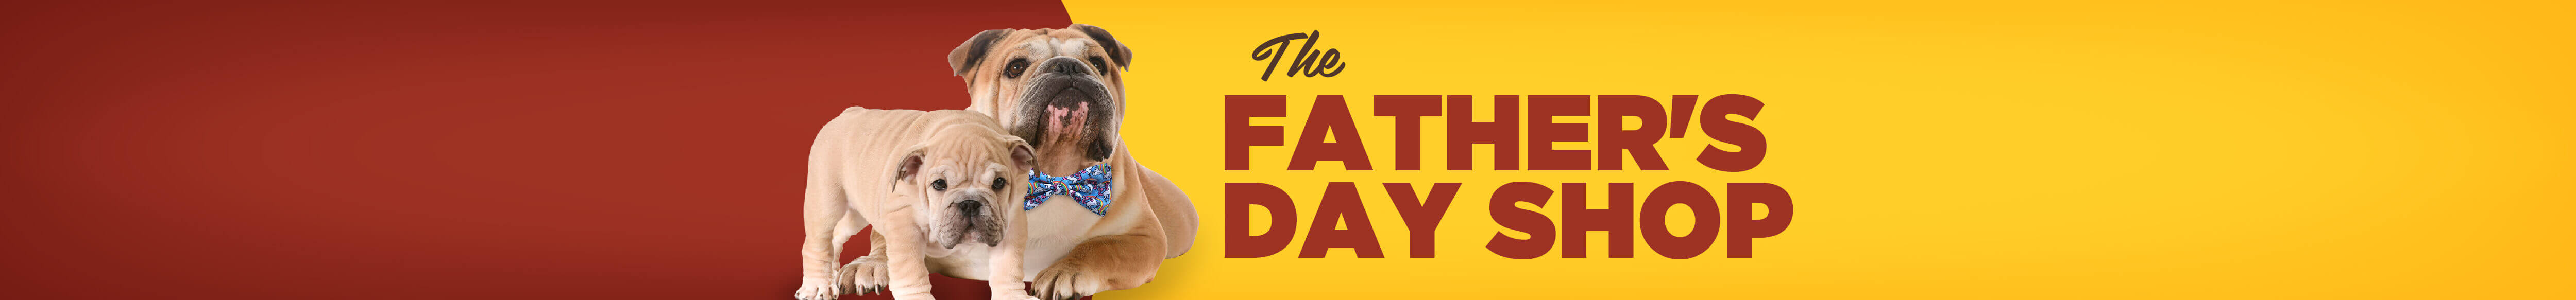 The Father's Day Shop for Pets